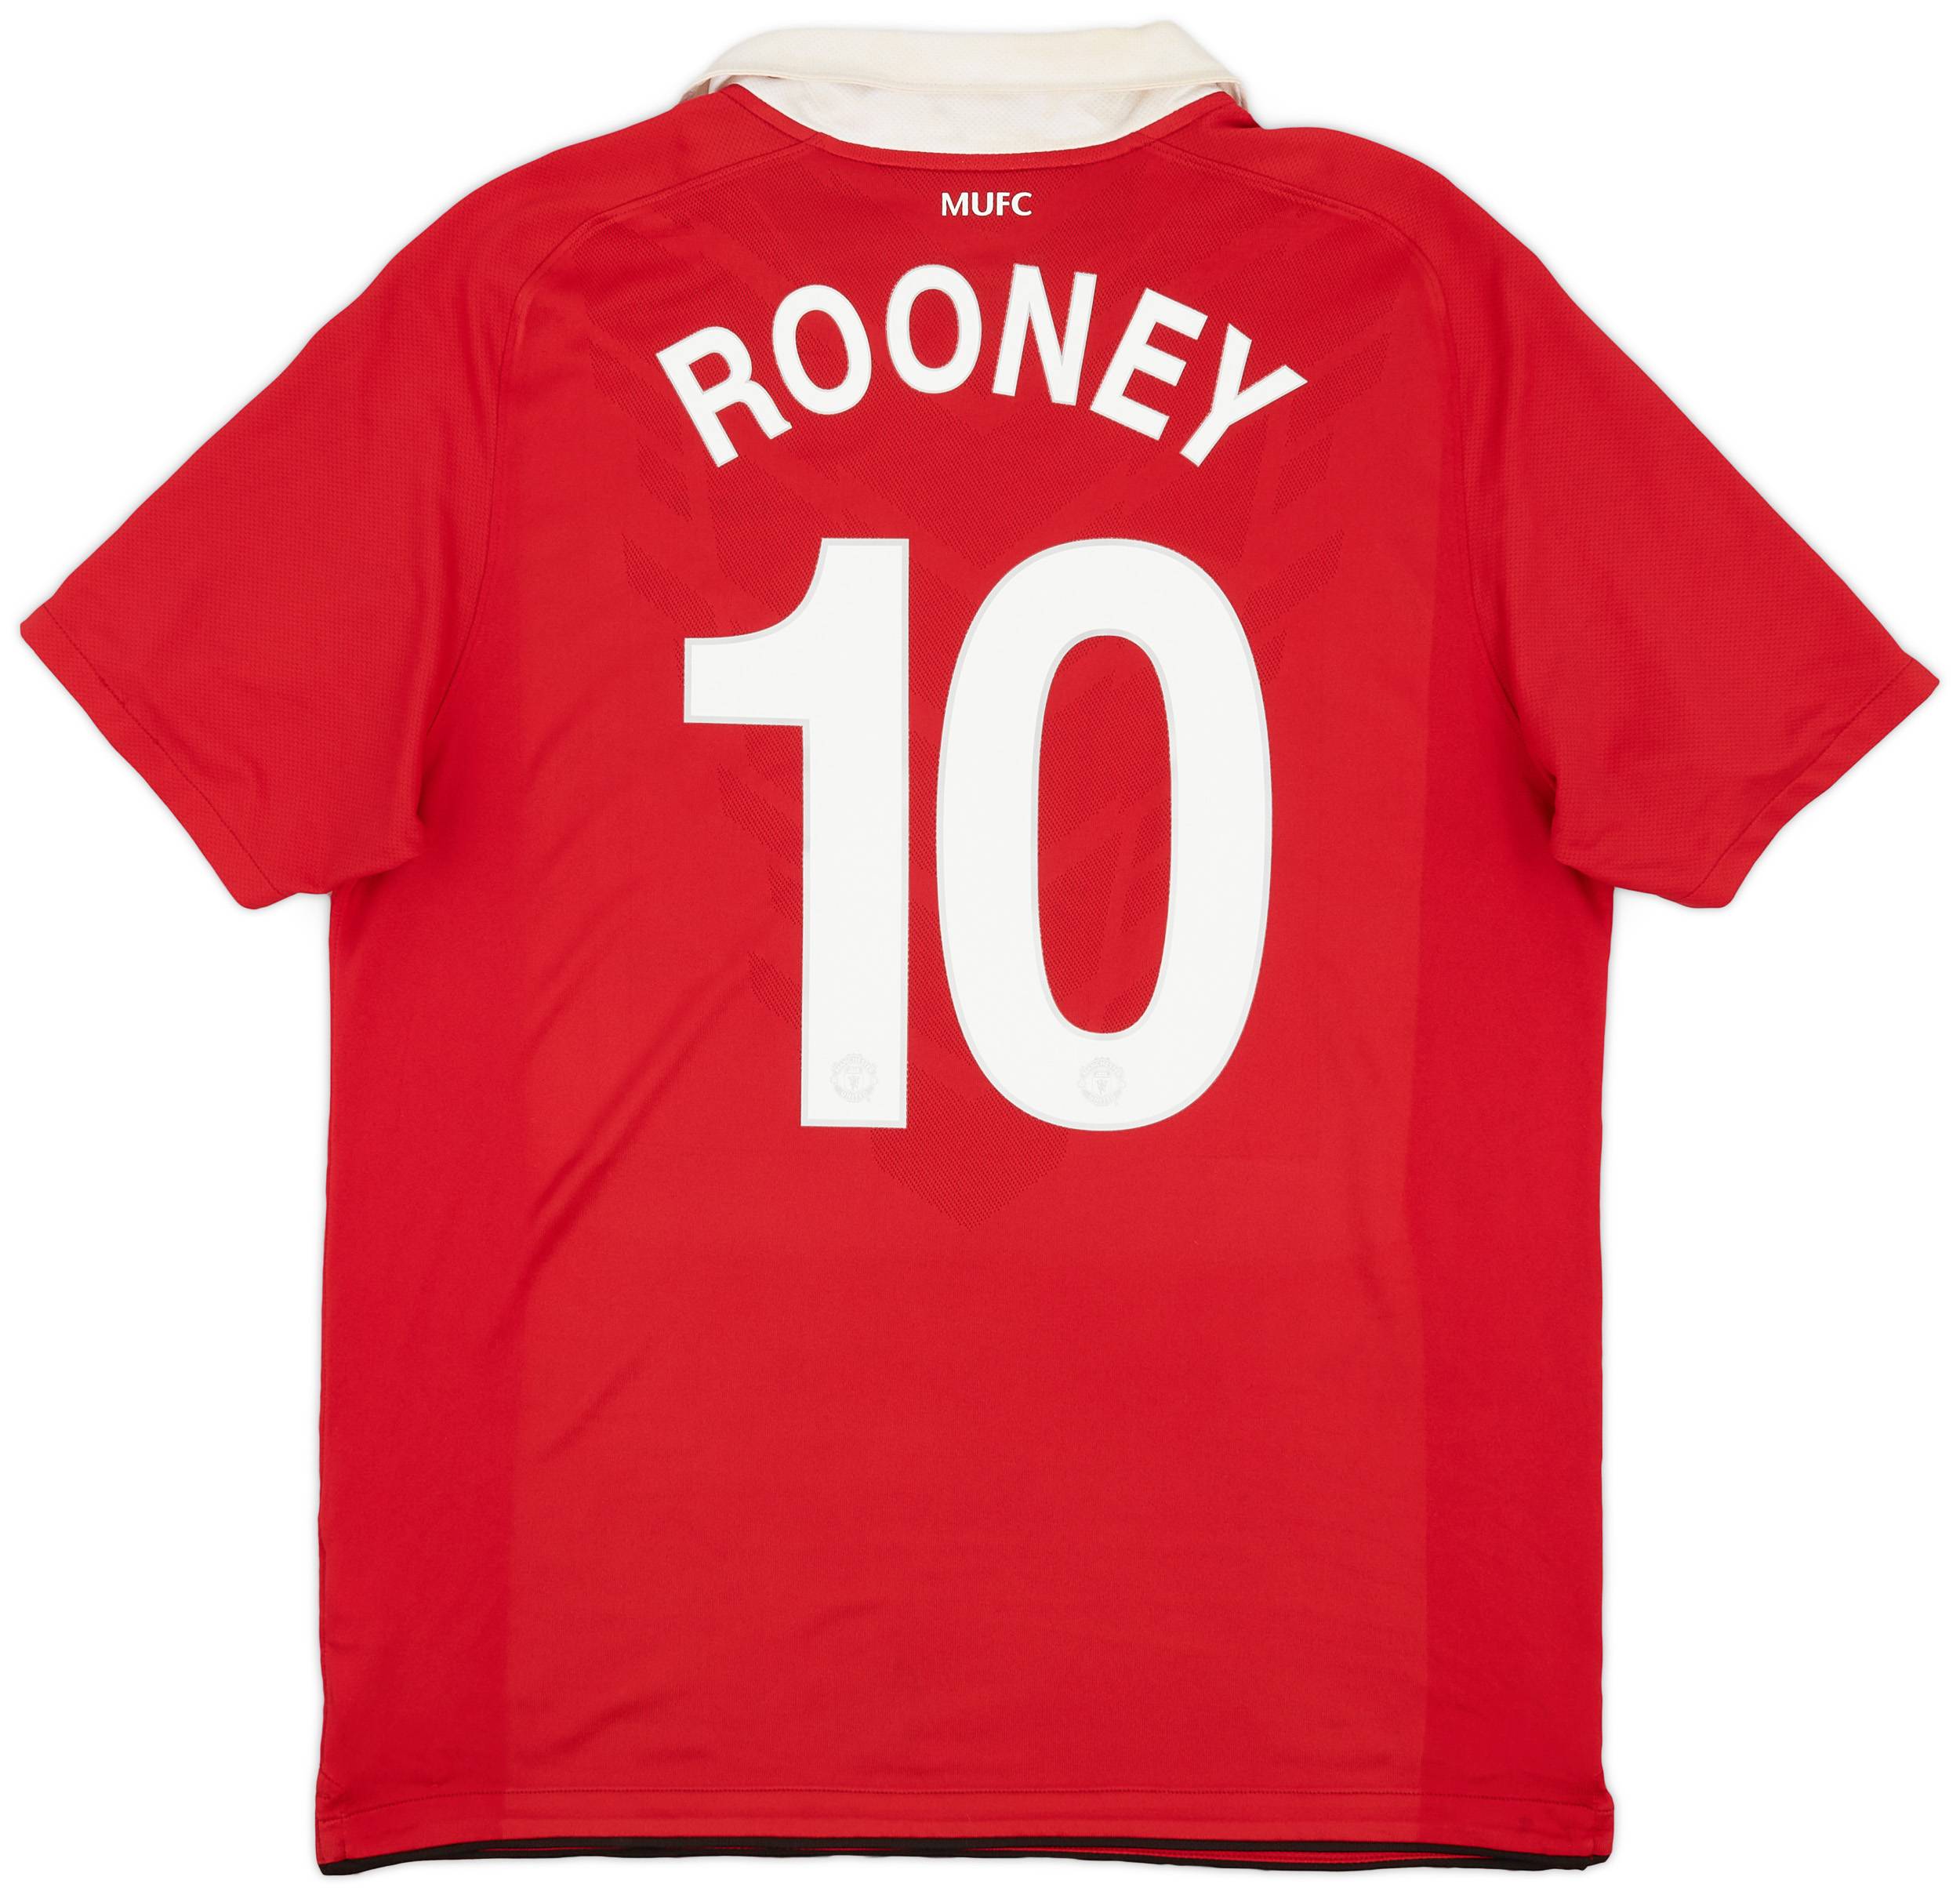 2010-11 Manchester United Home Shirt Rooney #10 - 6/10 - (L)